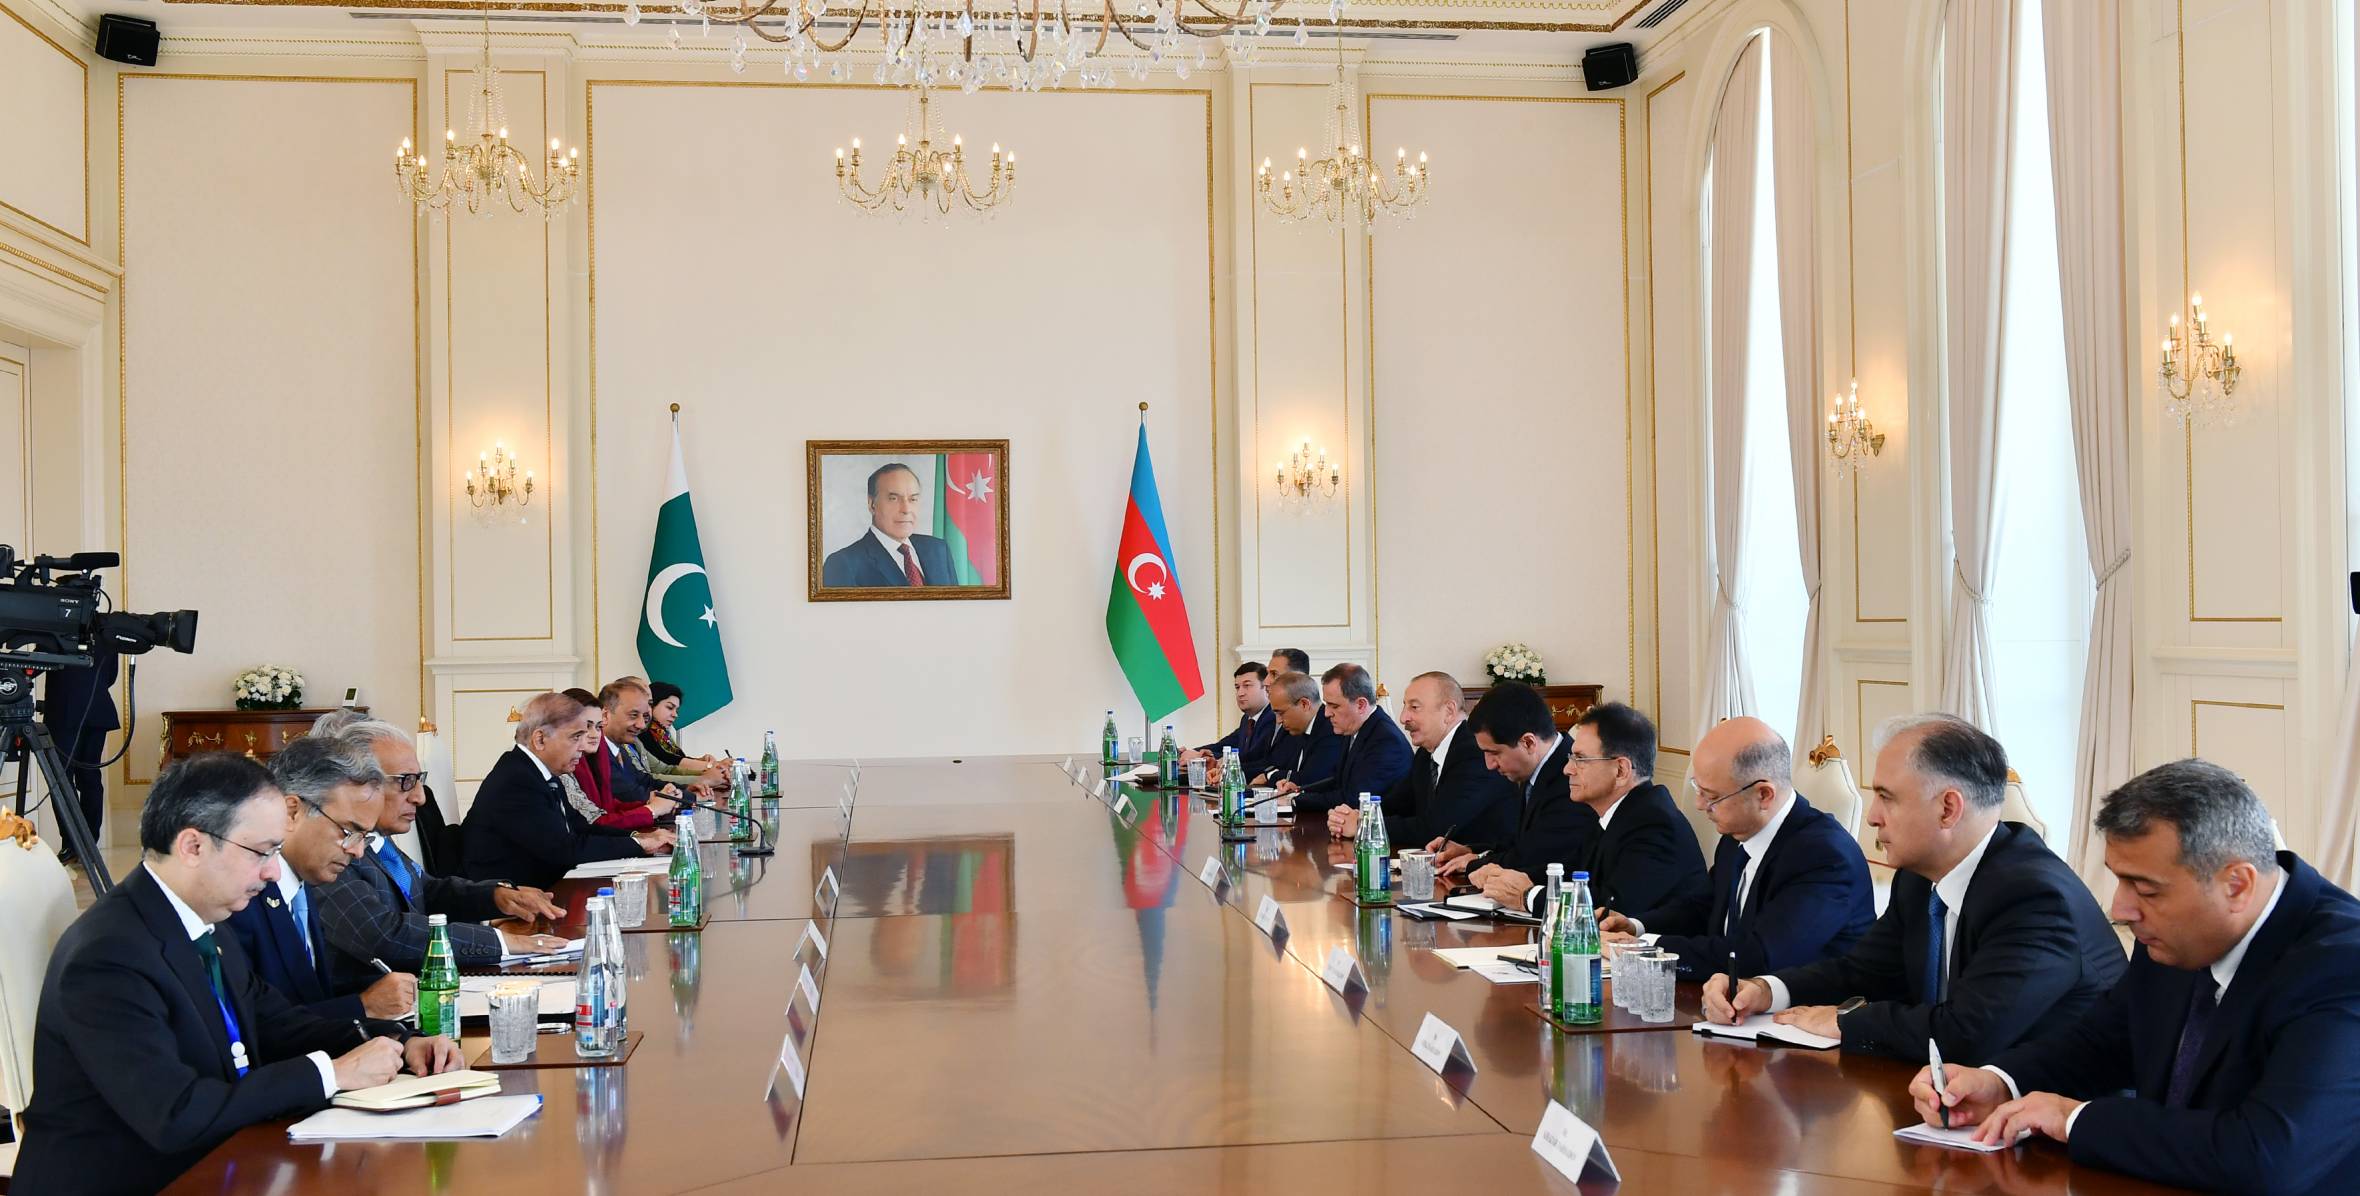 Ilham Aliyev and Prime Minister Muhammad Shehbaz Sharif held expanded meeting